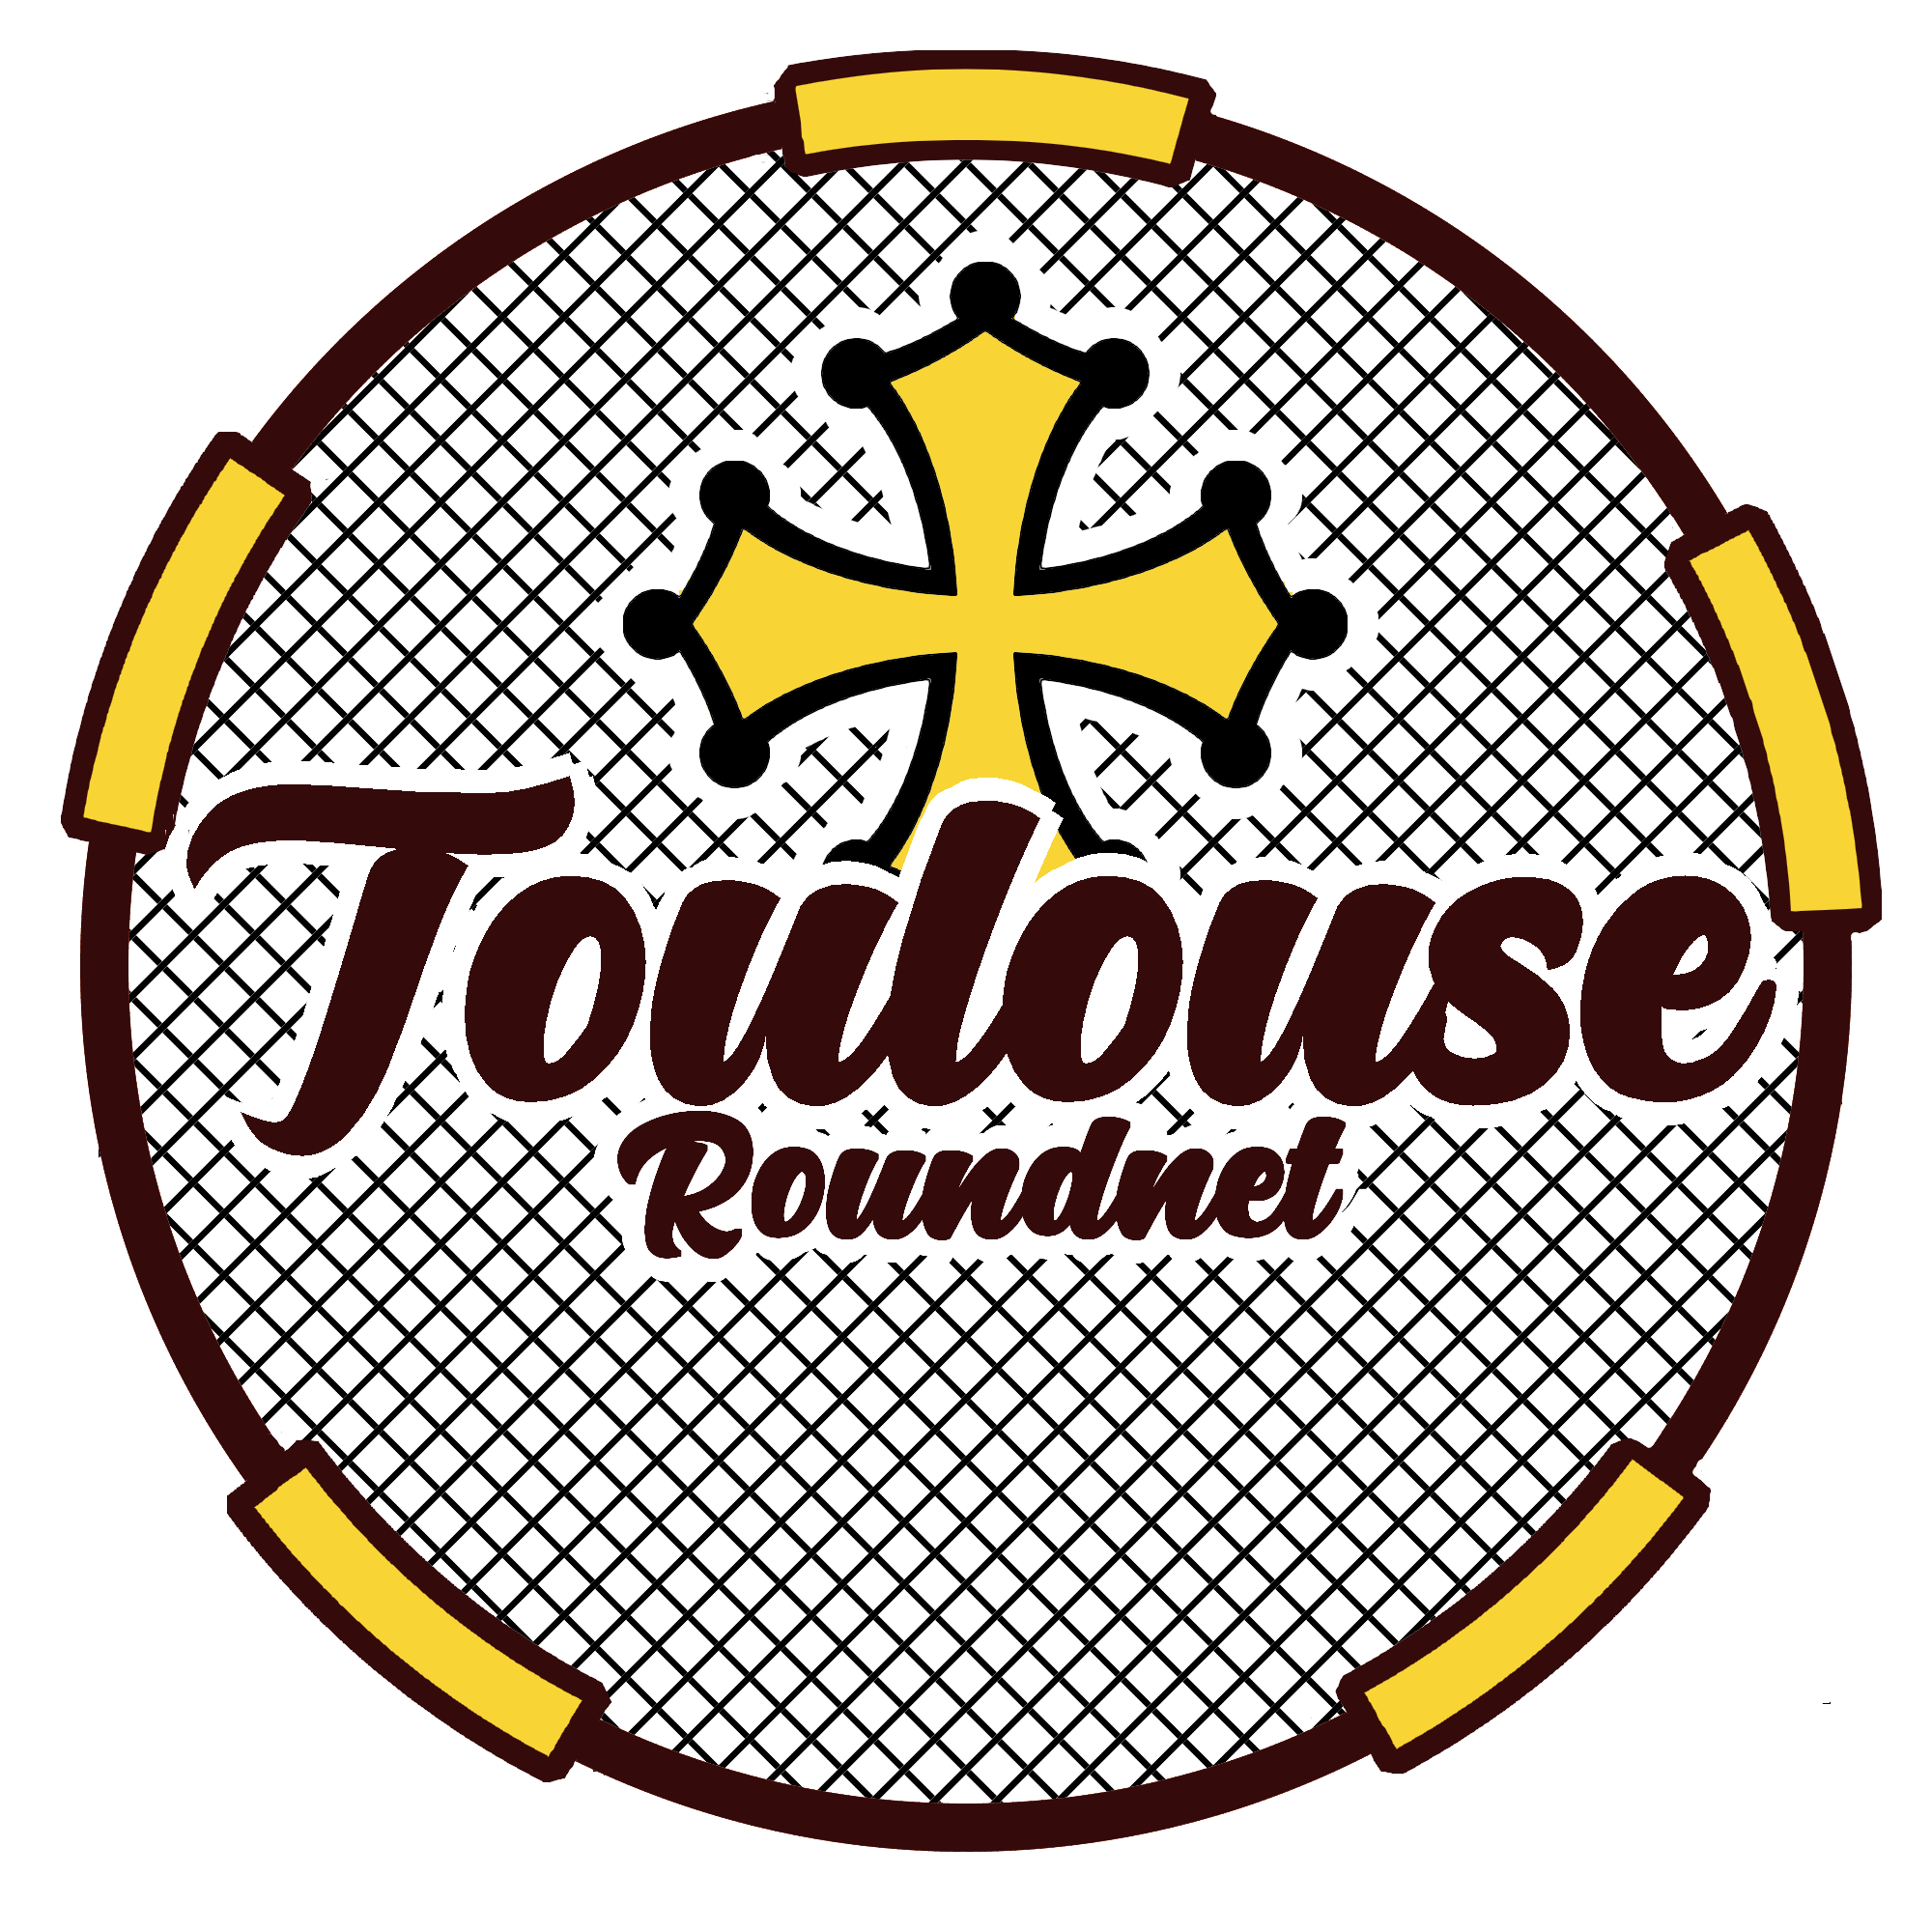 Roundnet Toulouse